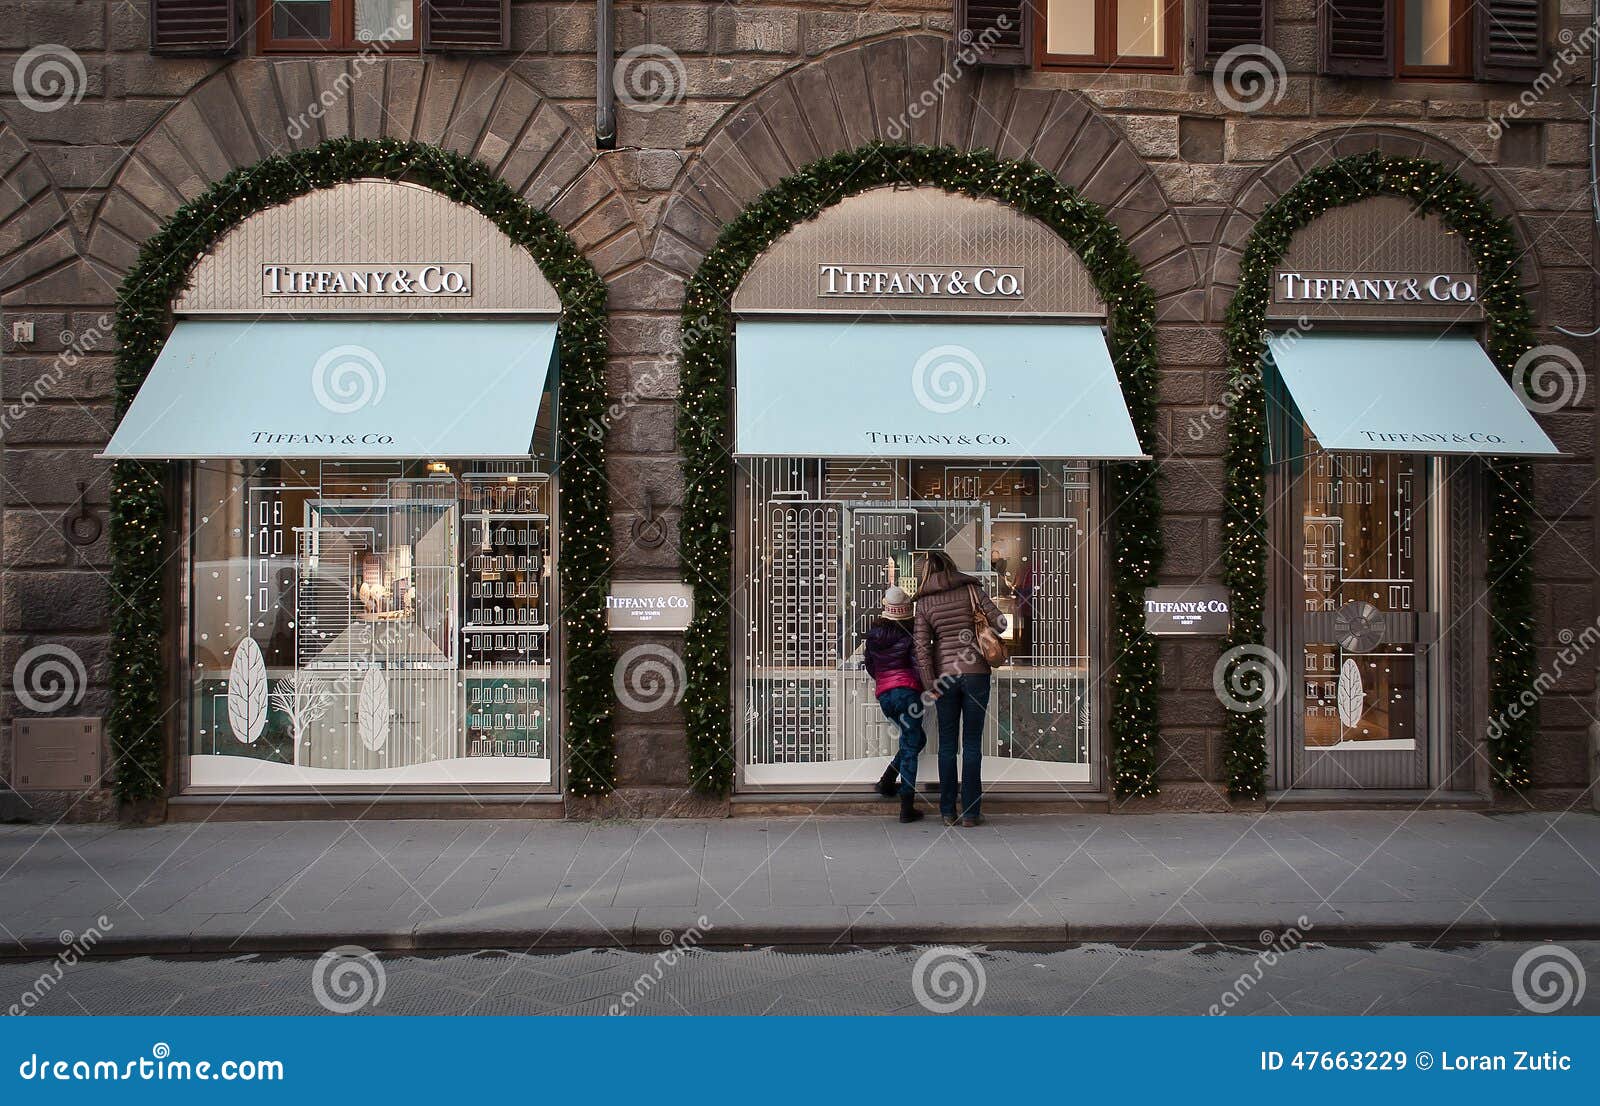 tiffany and co storefront